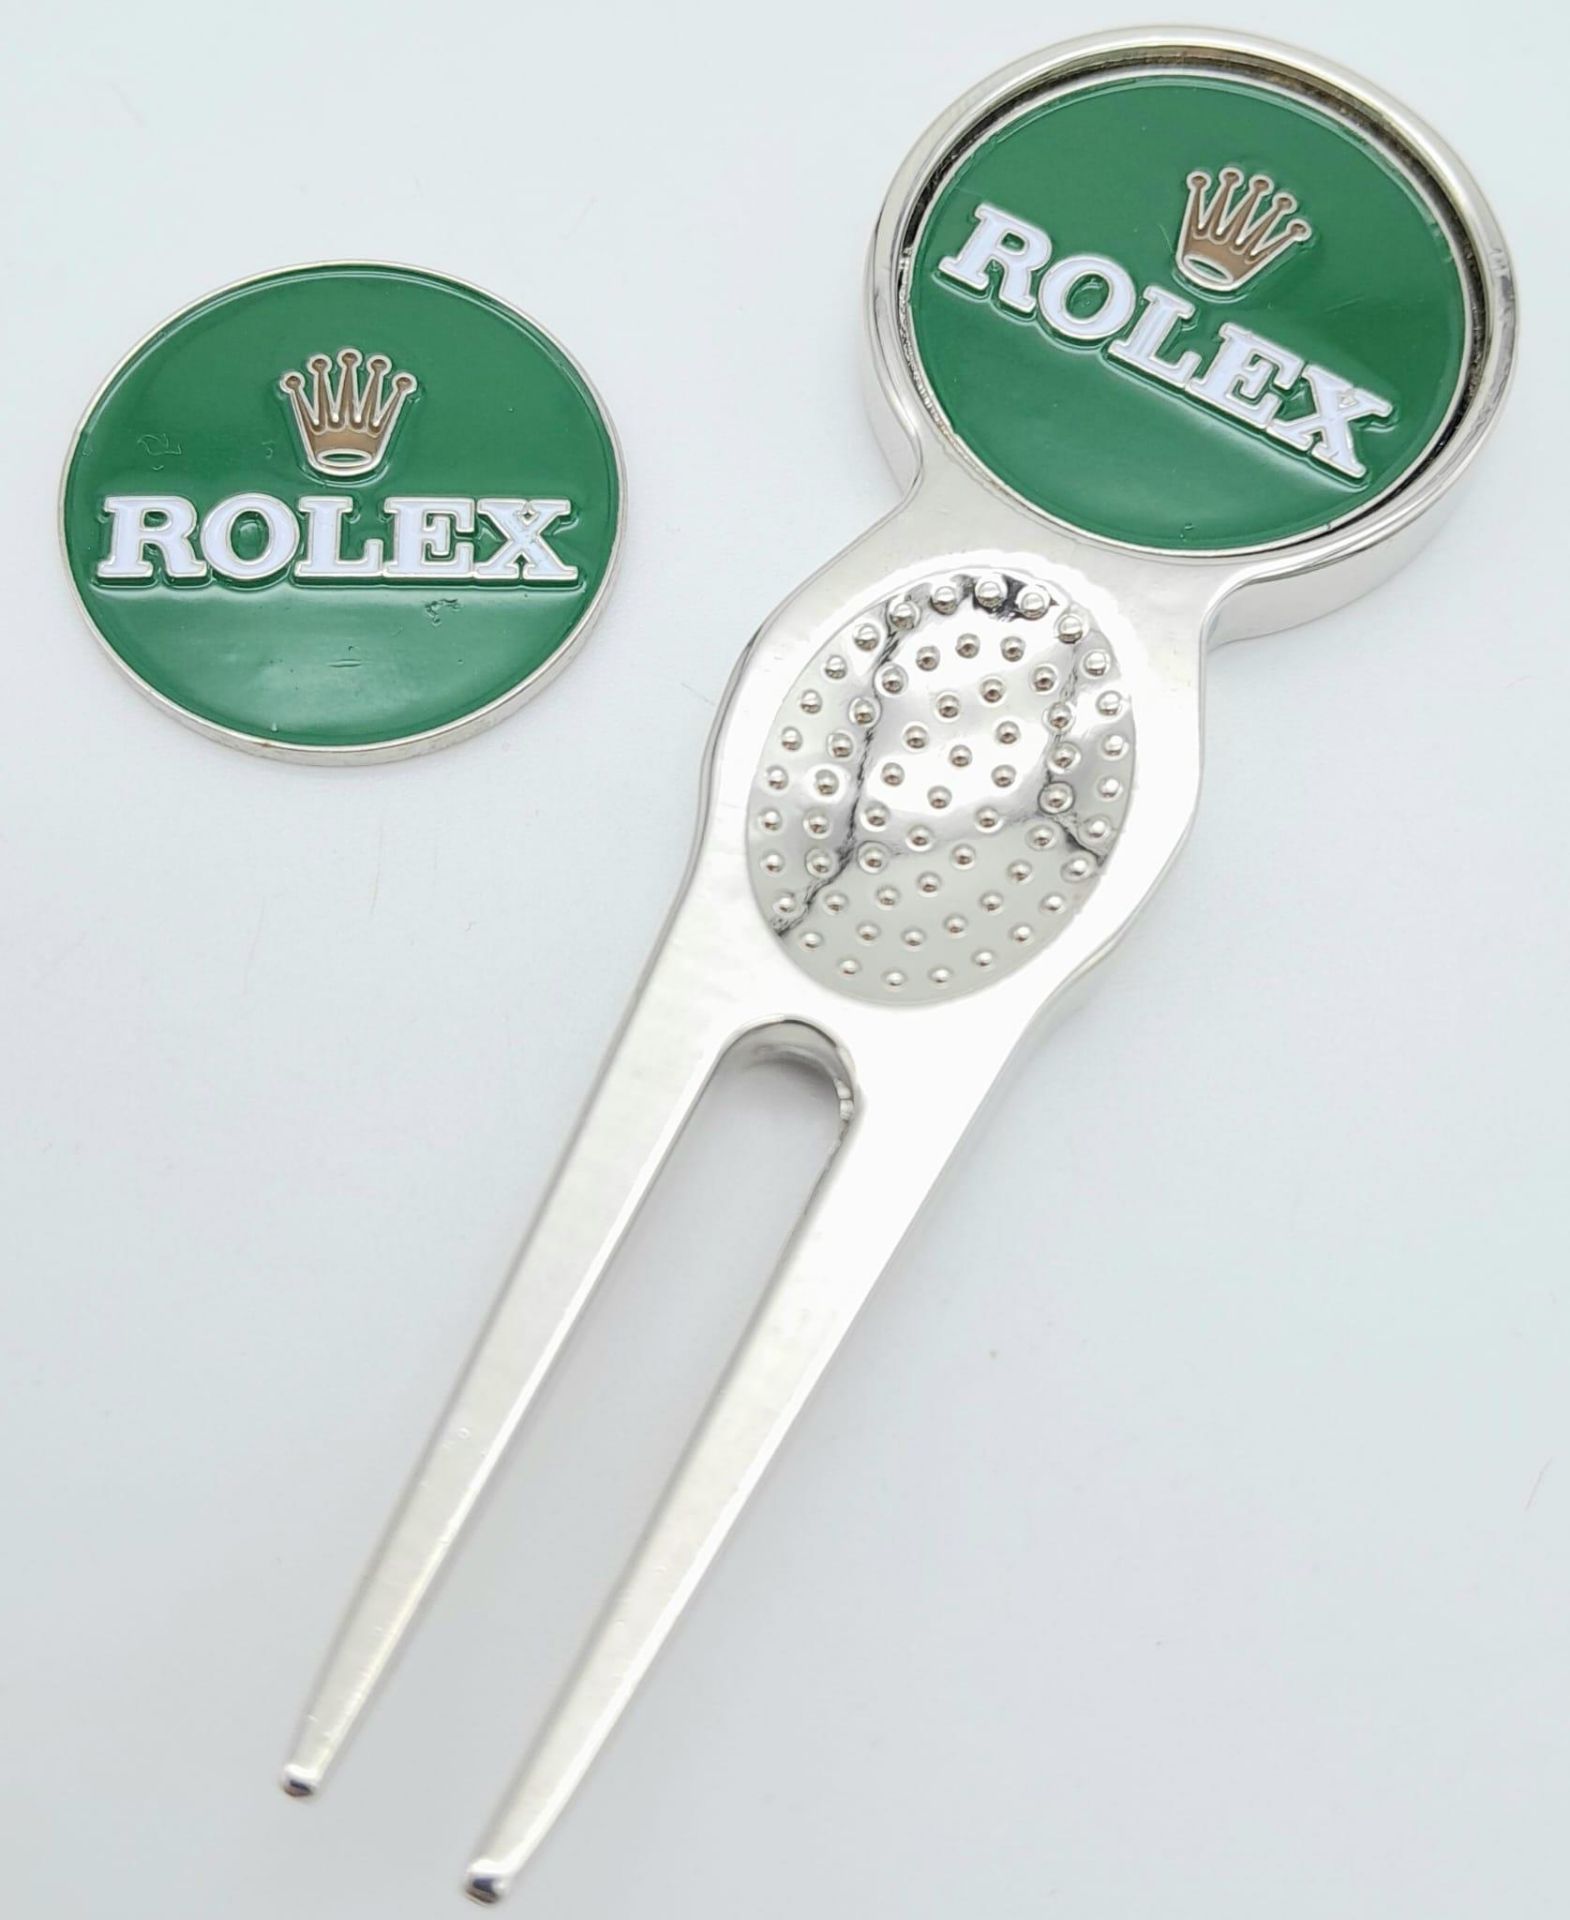 A Rolex Branded Putting Green Divot Repair Tool with Removable Ball Marker plus spare marker. As